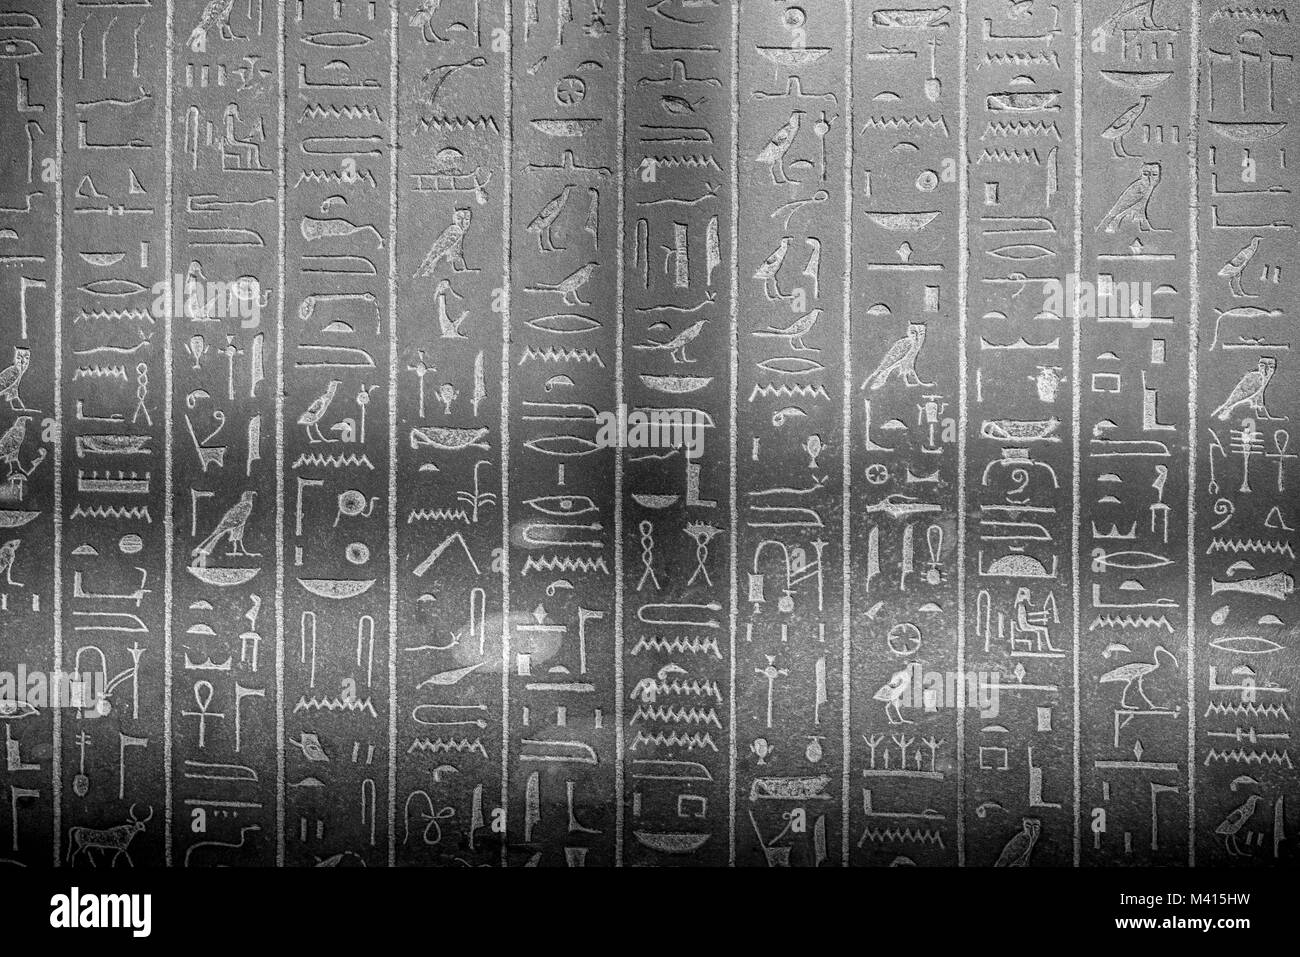 Some incredible Egyptian hieroglyphs on a tablet in the British Museum. Stock Photo